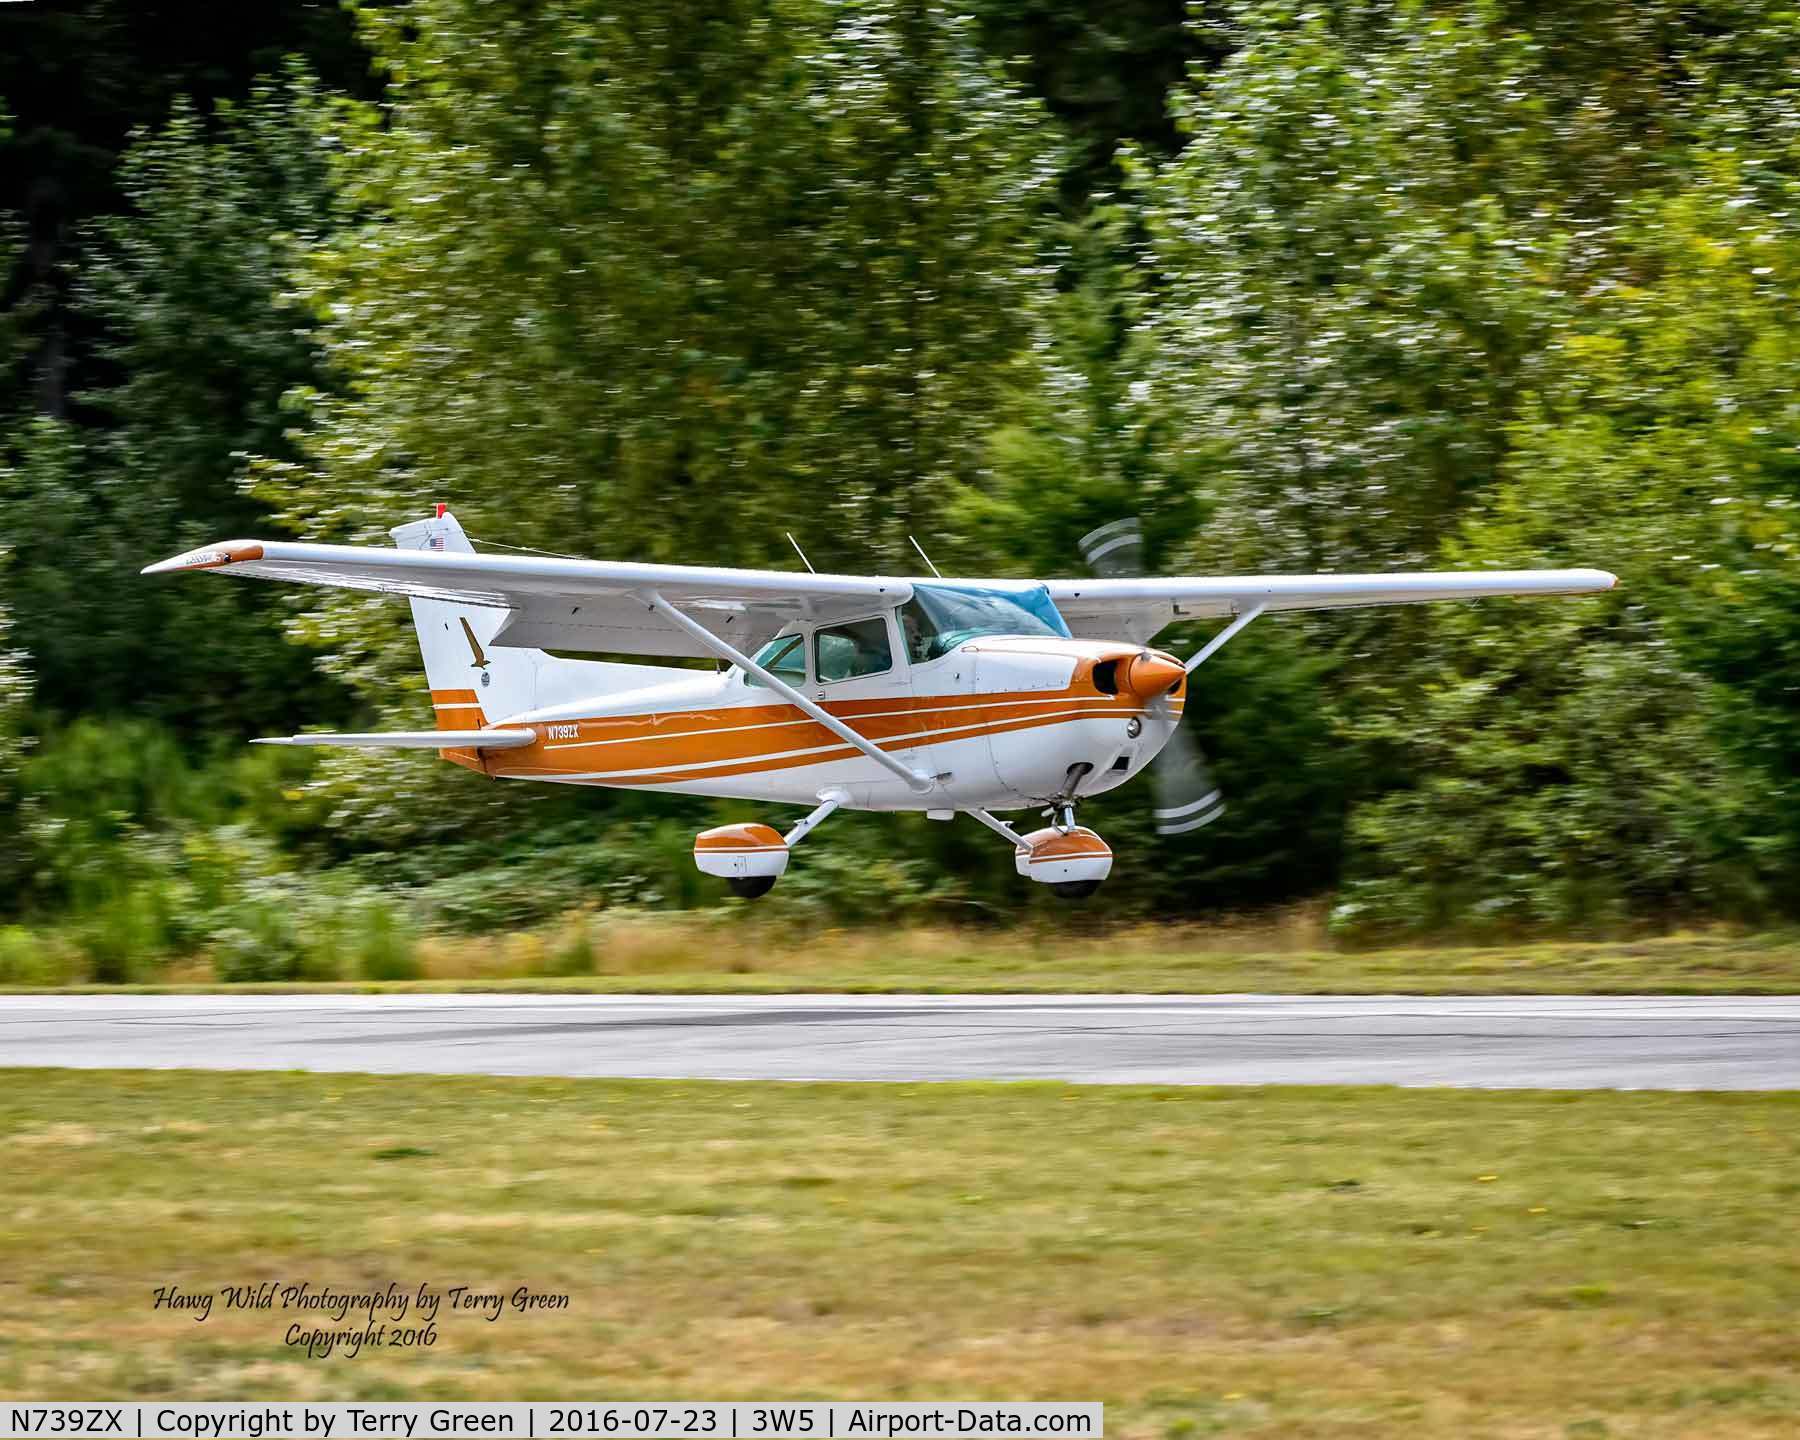 N739ZX, 1978 Cessna 172N C/N 17270947, 2016 North Cascades Vintage Aircraft Museum Fly-In Mears Field 3W5 Concrete Washington